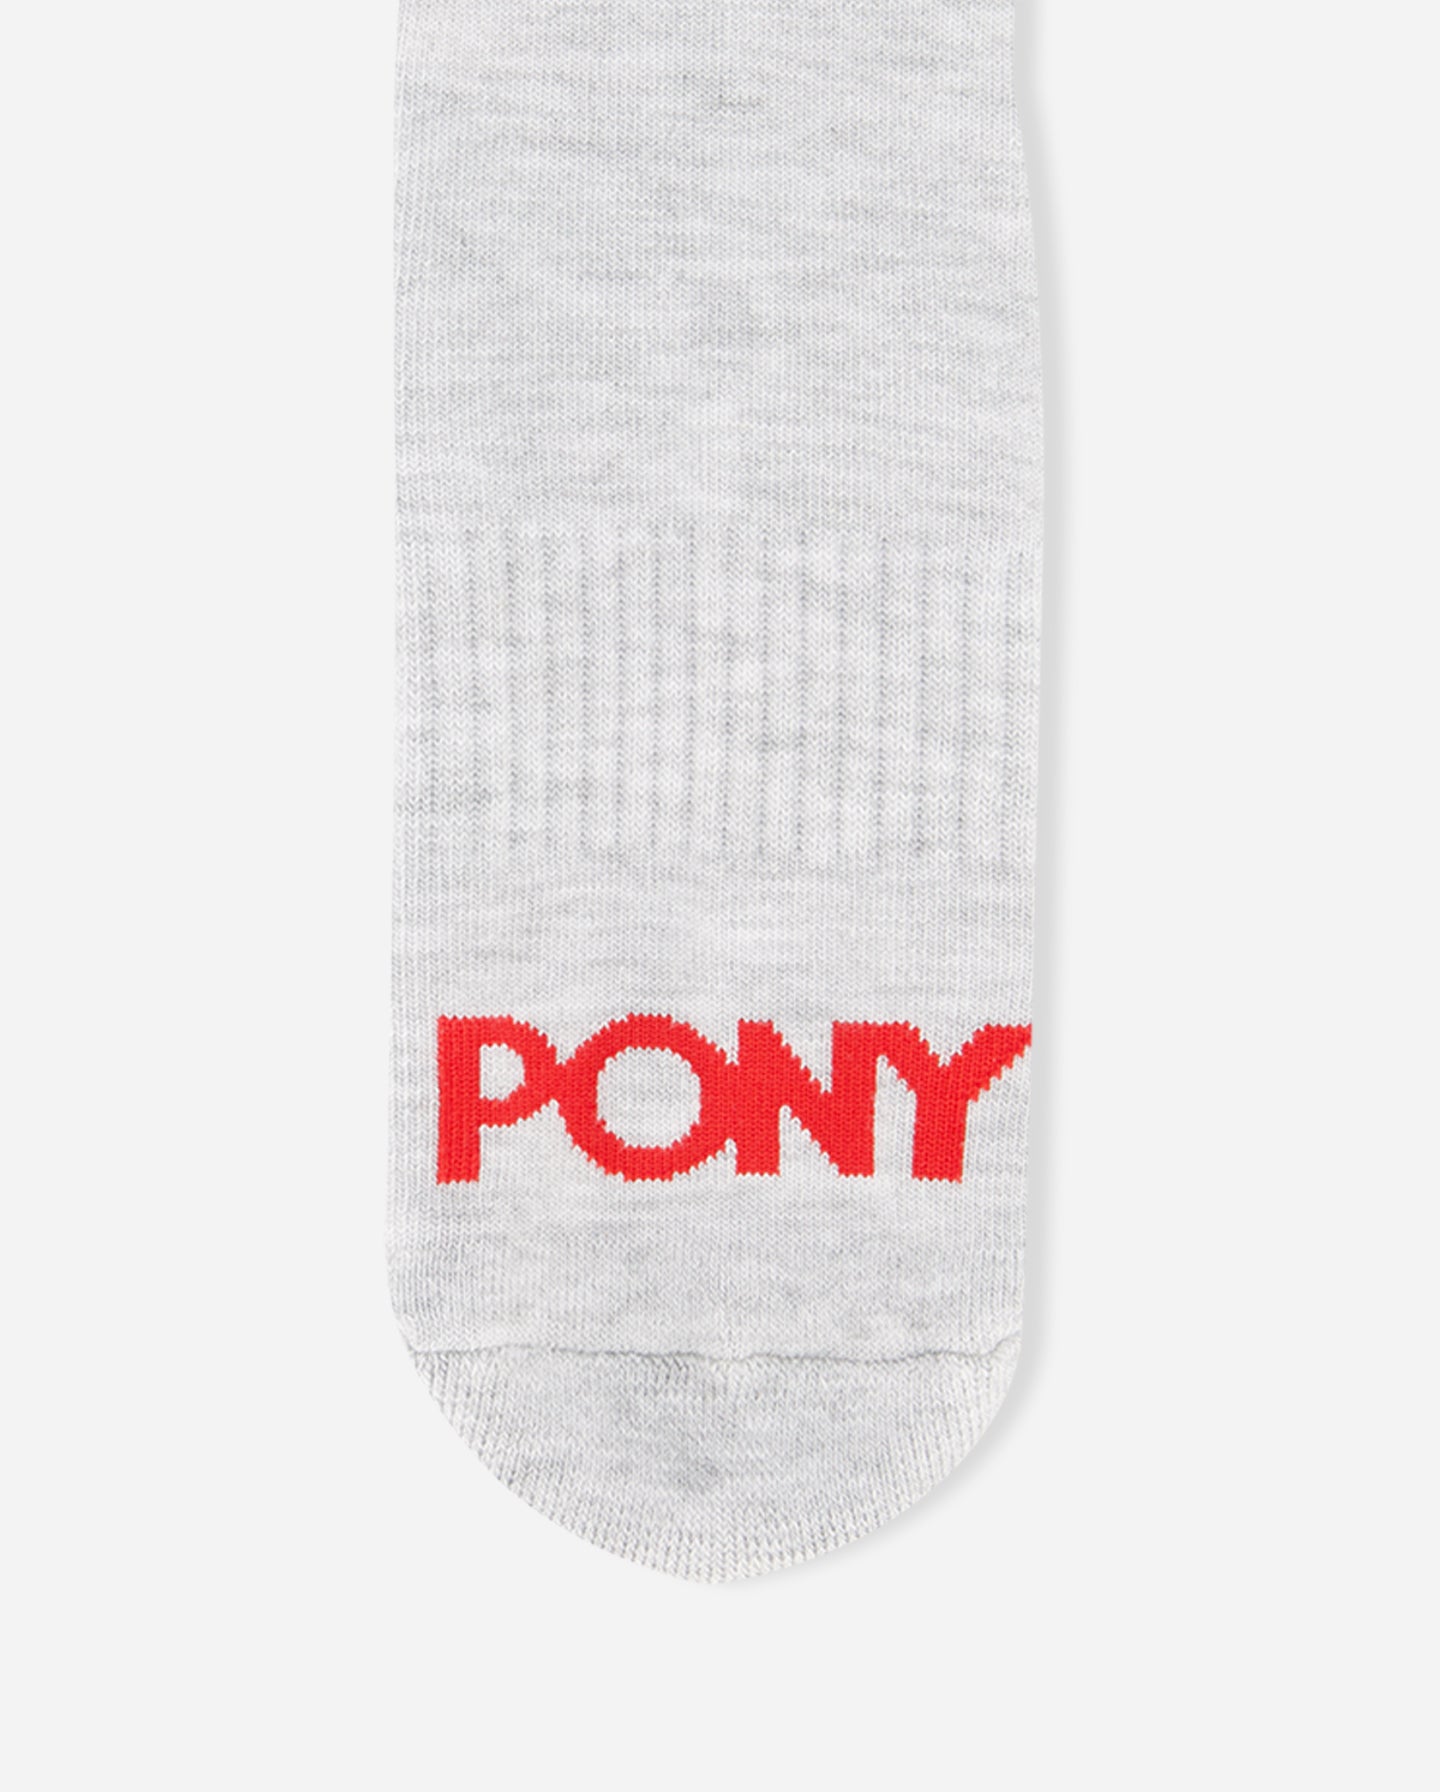 GREY LOCK-UP EMBROIDERED SOCK